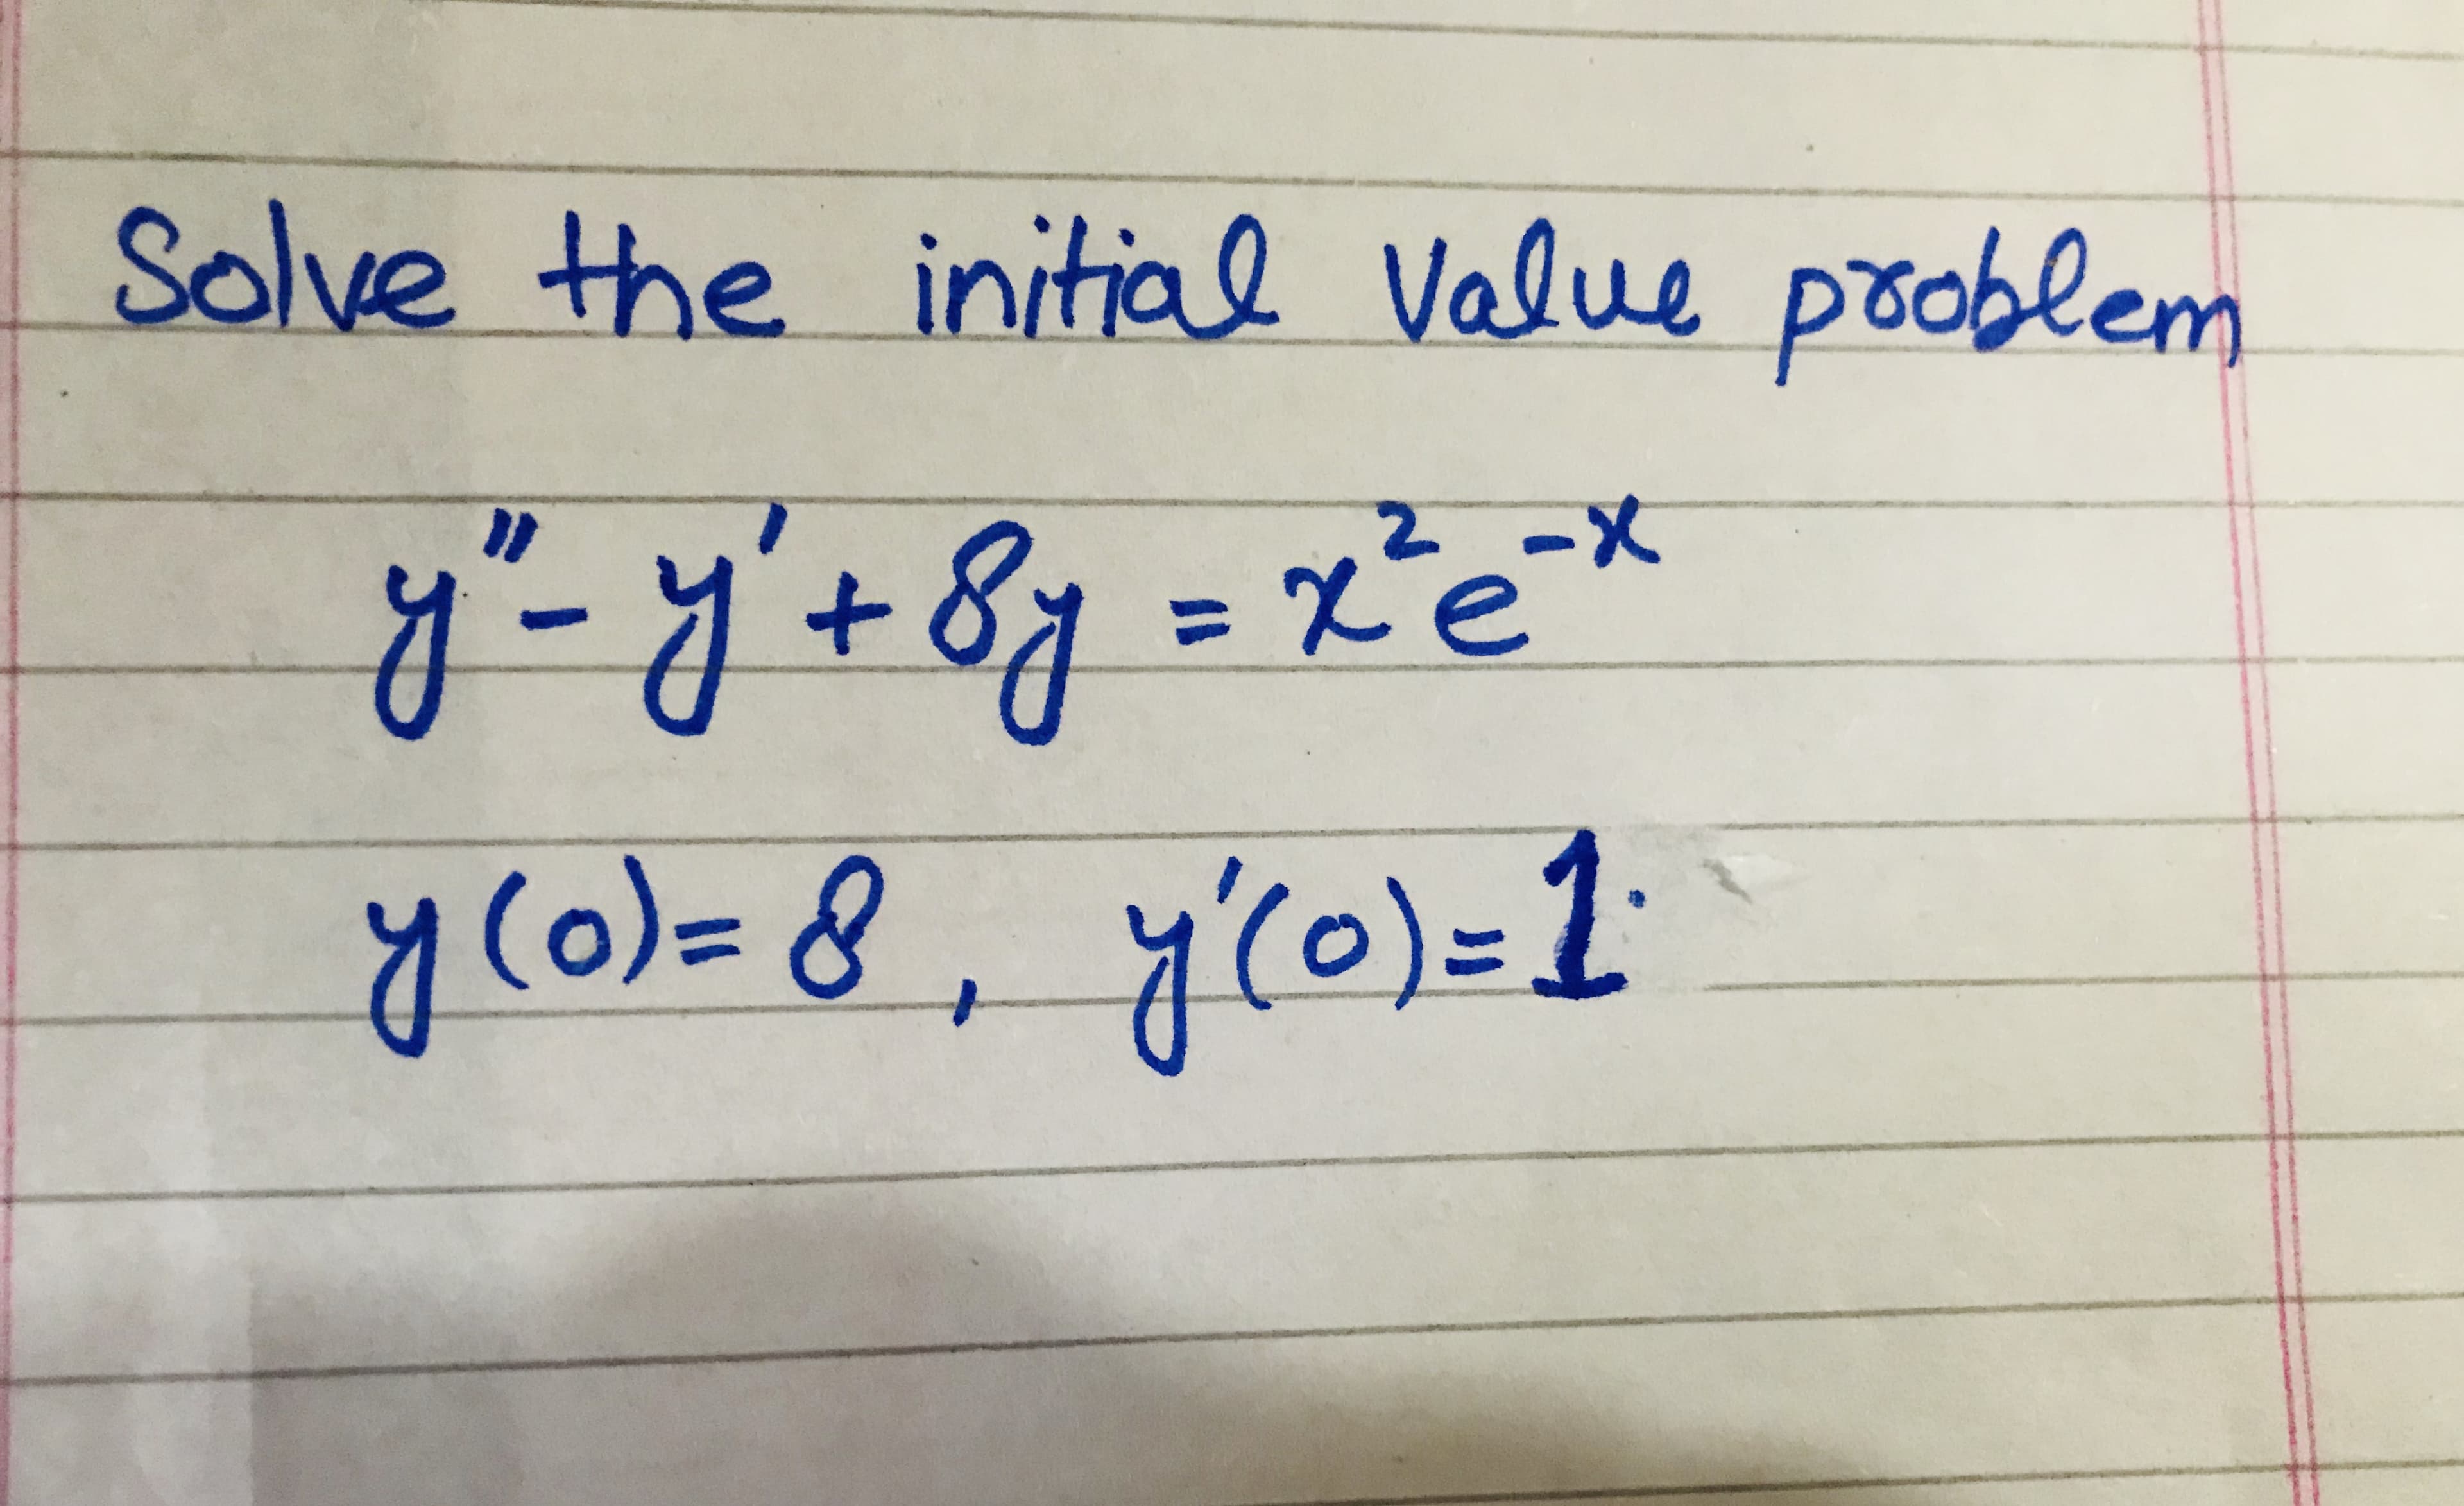 Solve the initial Value pooblem
2-X
= x'e*
%3D
y(o)= 8, ylo)=1
(0)=1
